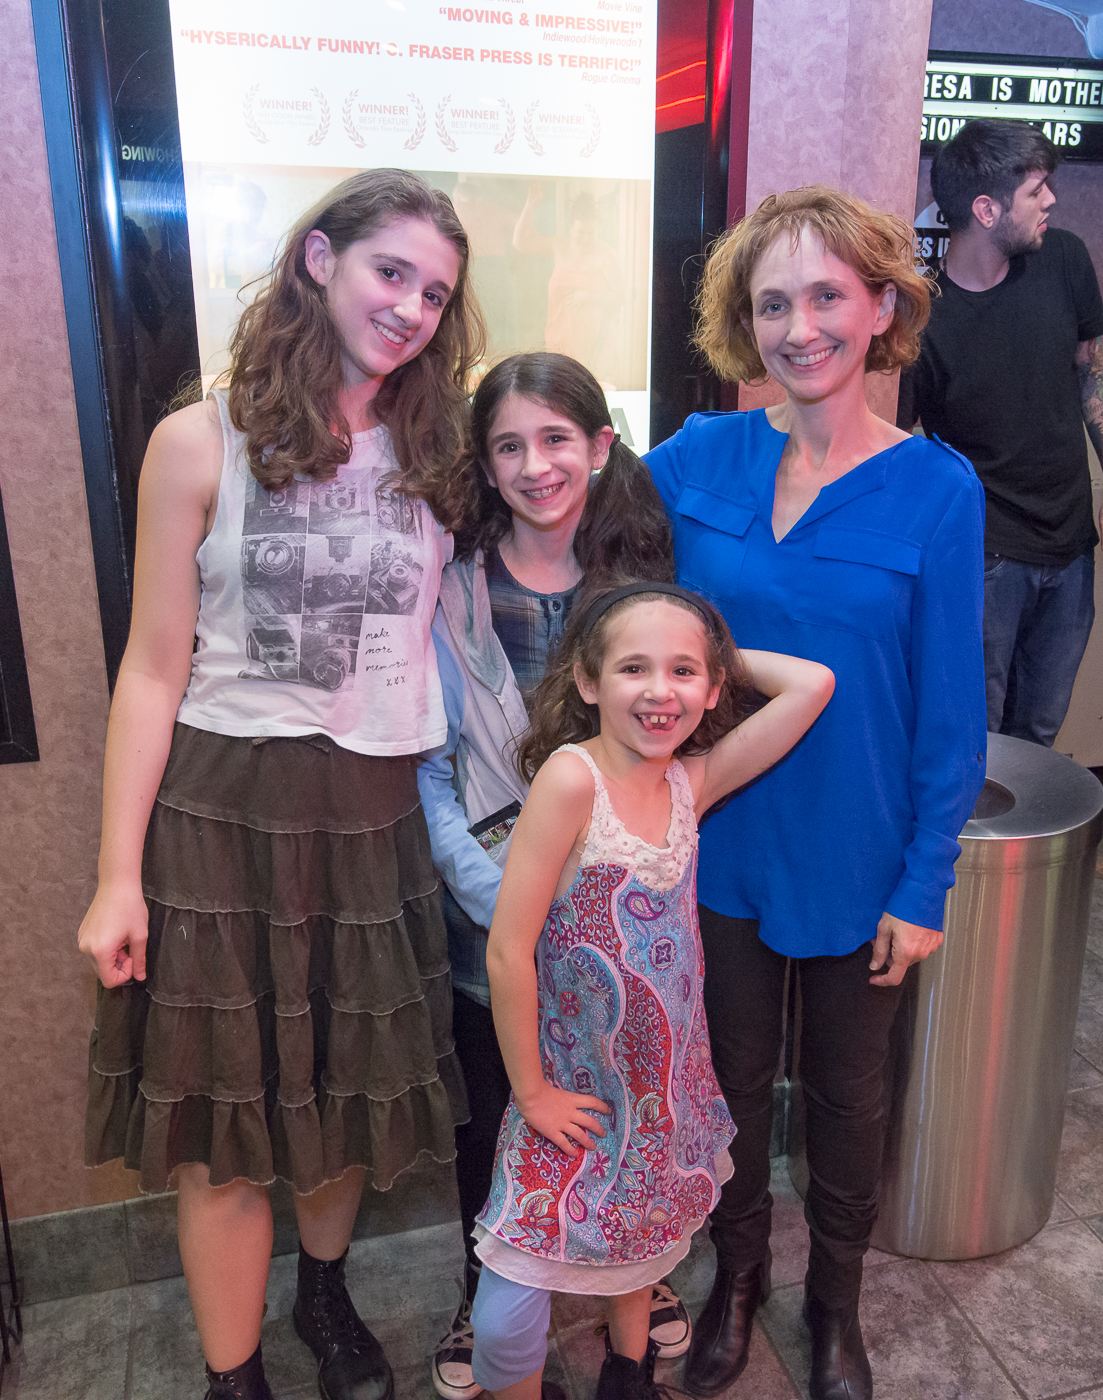 Schuyler Press, Maeve Press, Amaya Press and C. Fraser Press at the Theresa Is a Mother NYC film premiere